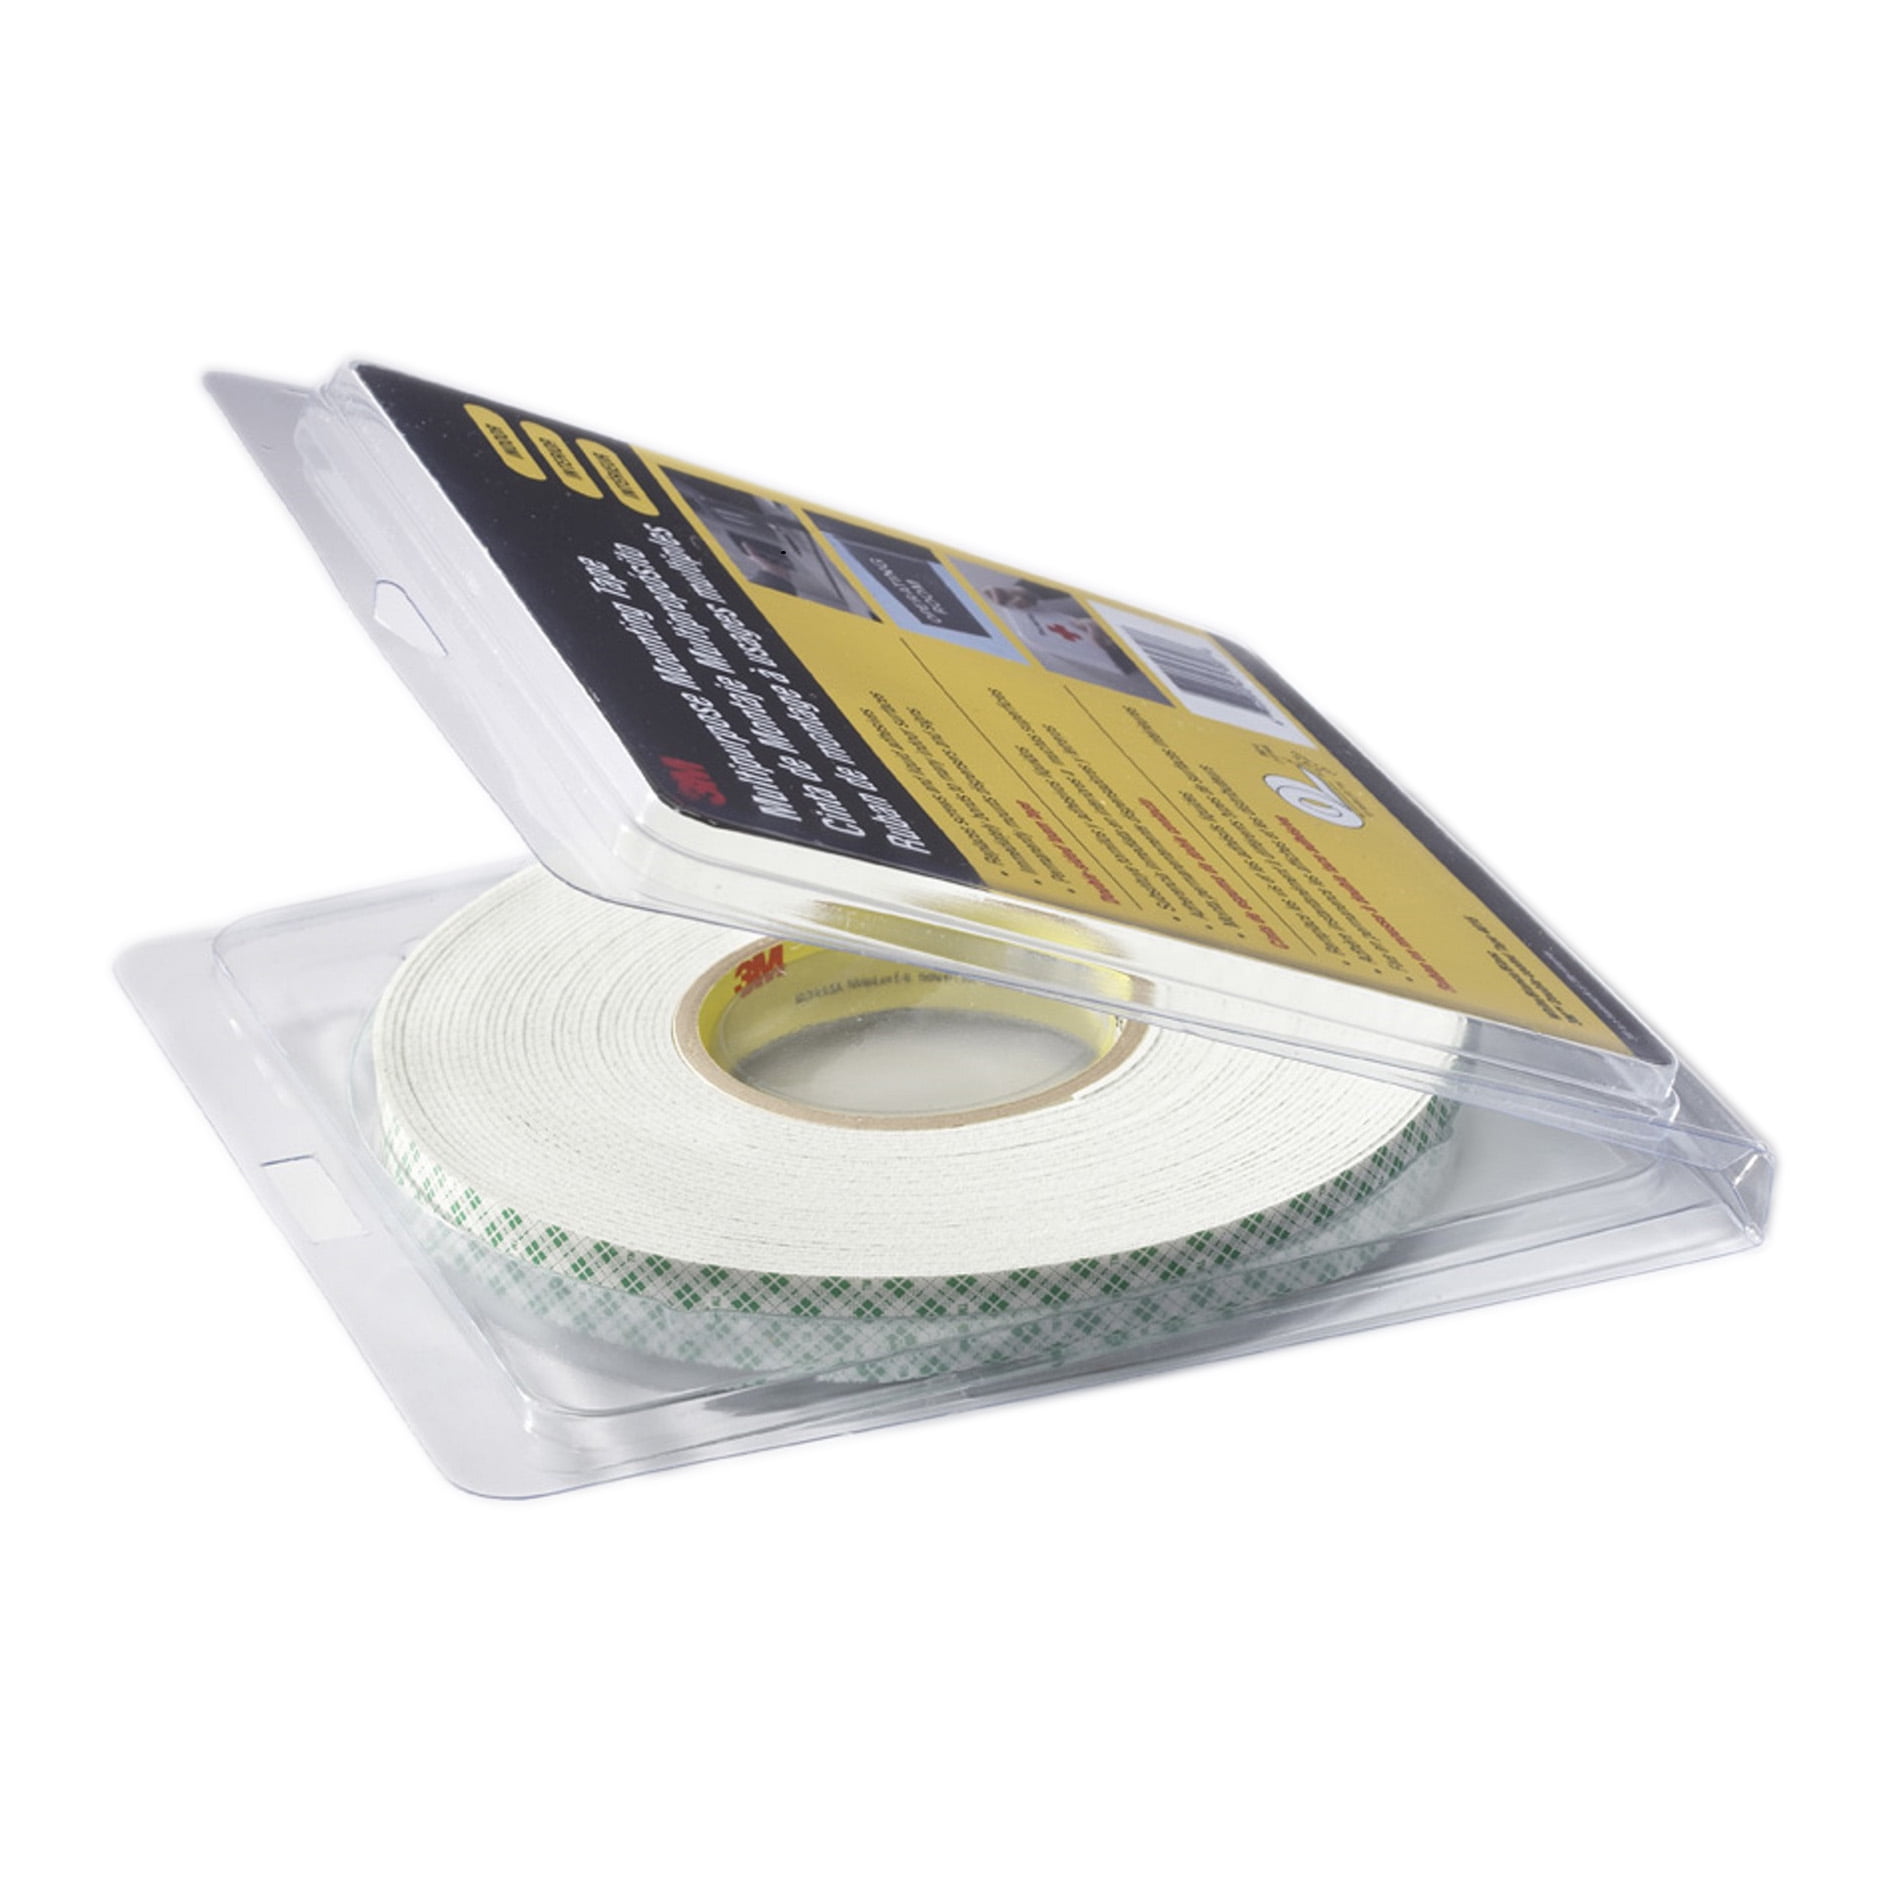 3M Double Sided Rectangular Adhesive Foam pad Sticky, Size: 1 Inch